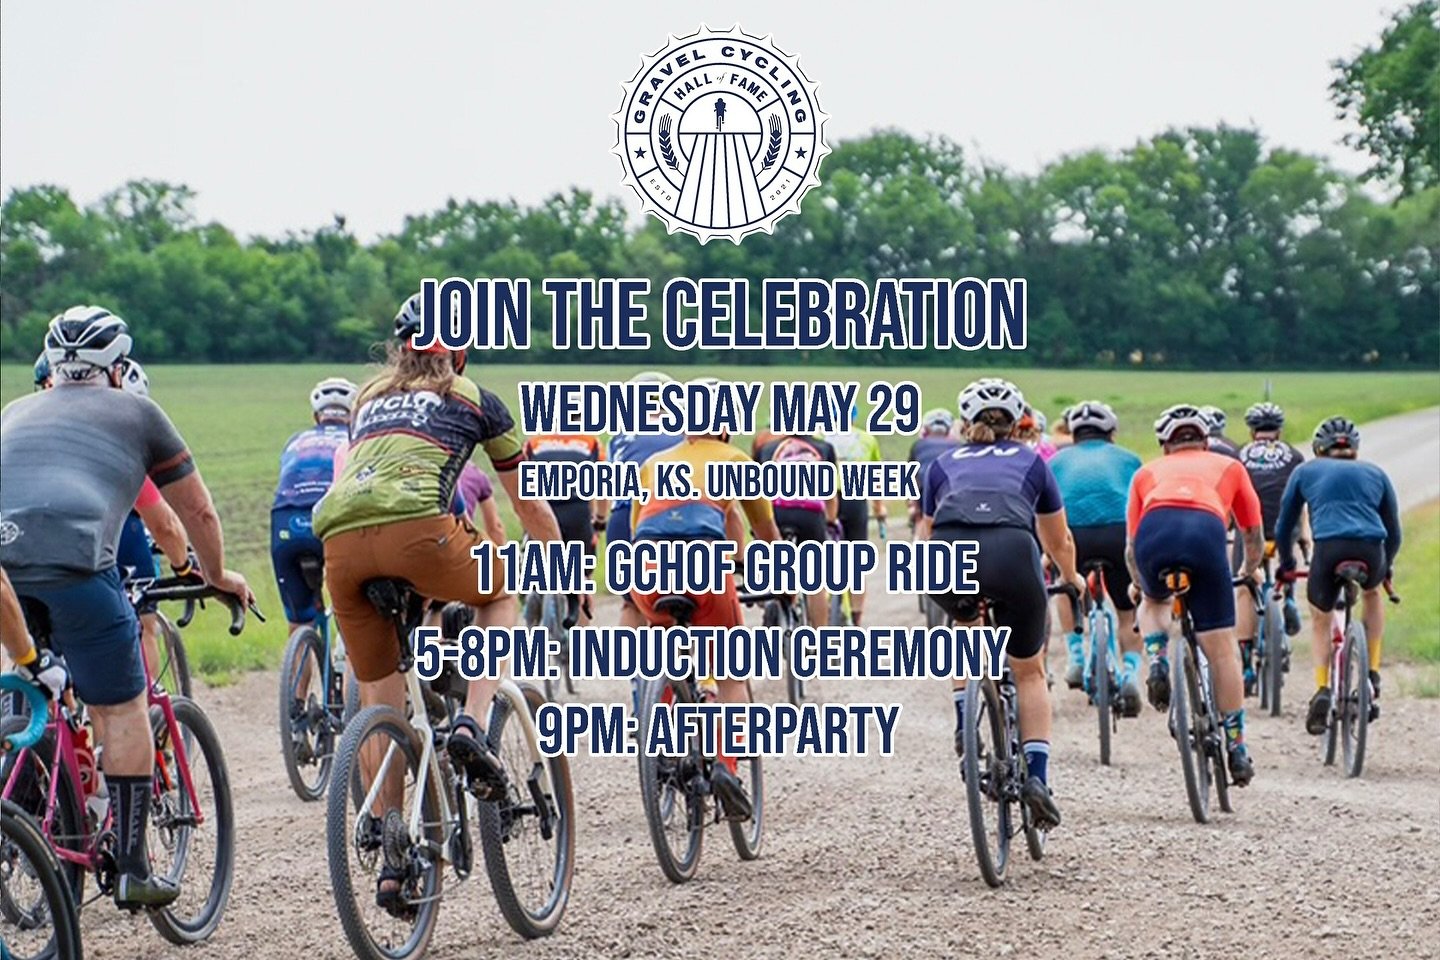 3 WEEKS!! In 3 short weeks, we&rsquo;ll be kicking off @unboundgravel week with the first activities of the week! Be sure to join us for all the activities!!⁠
⁠
11AM: First group ride of Unbound week! Ride with the true legends of the sport!⁠
5-8PM: 